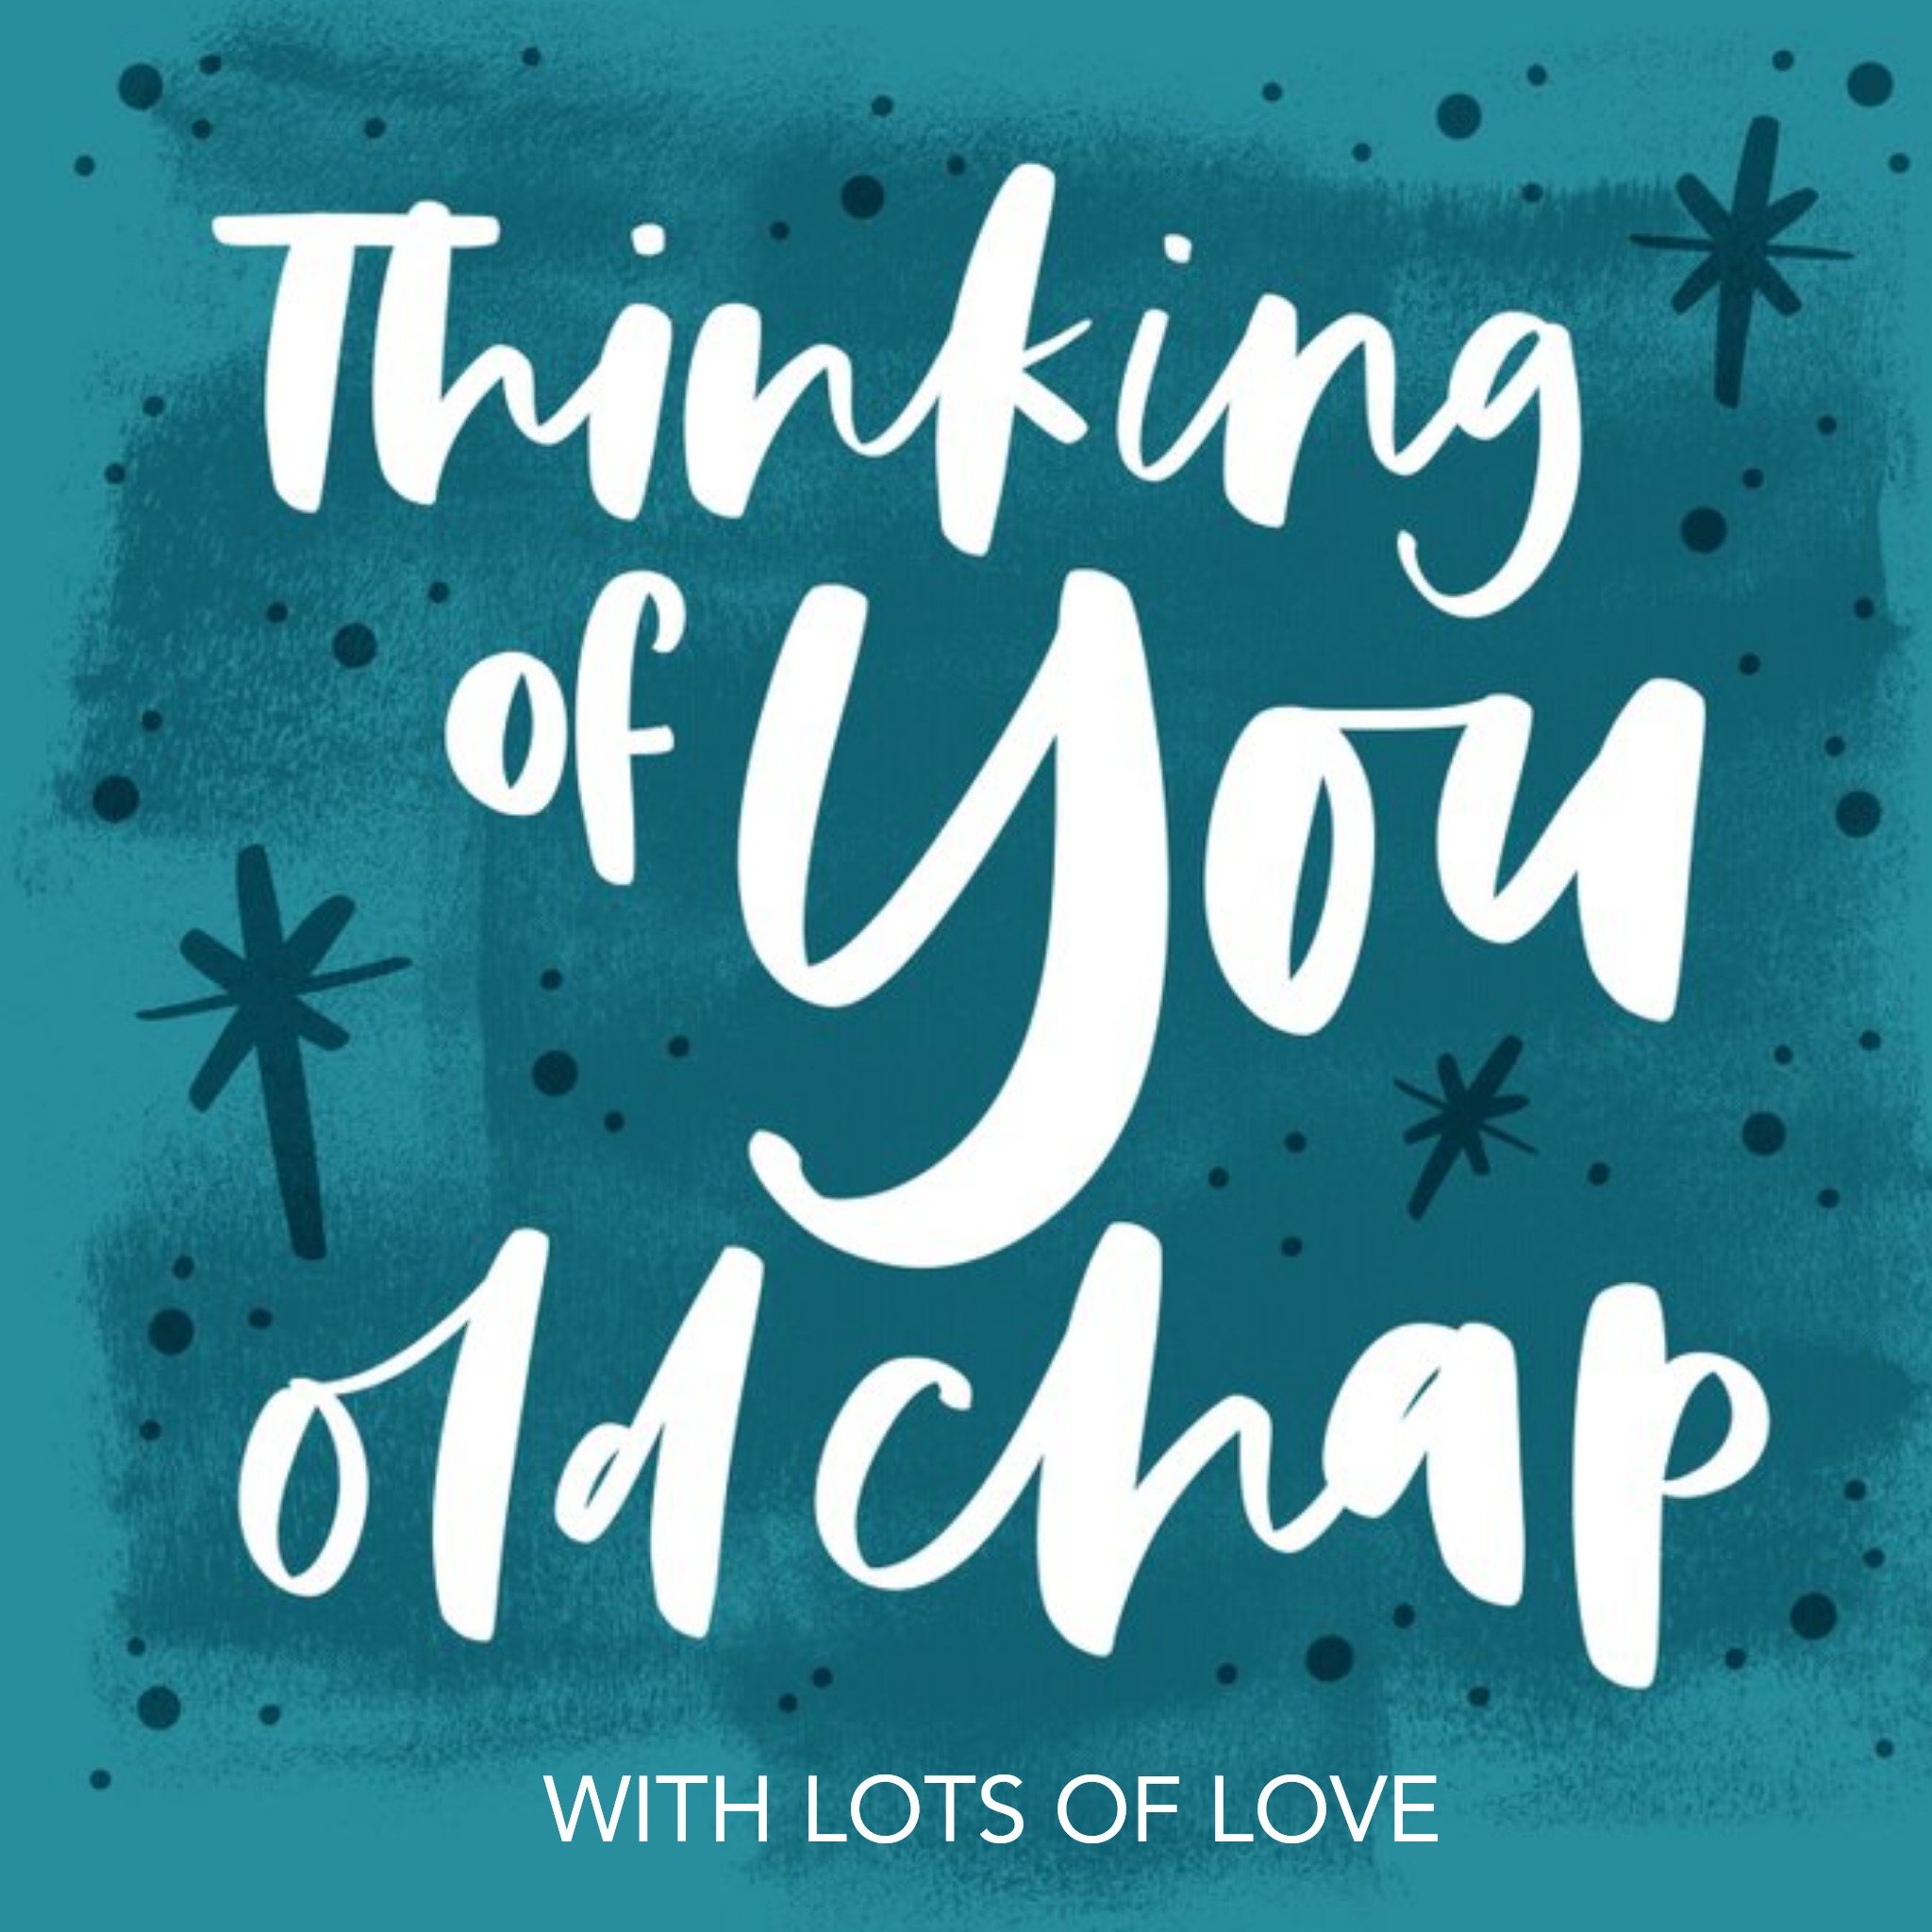 Moonpig Modern Typographic Thinking Of You Old Chap Sympathy Card, Large